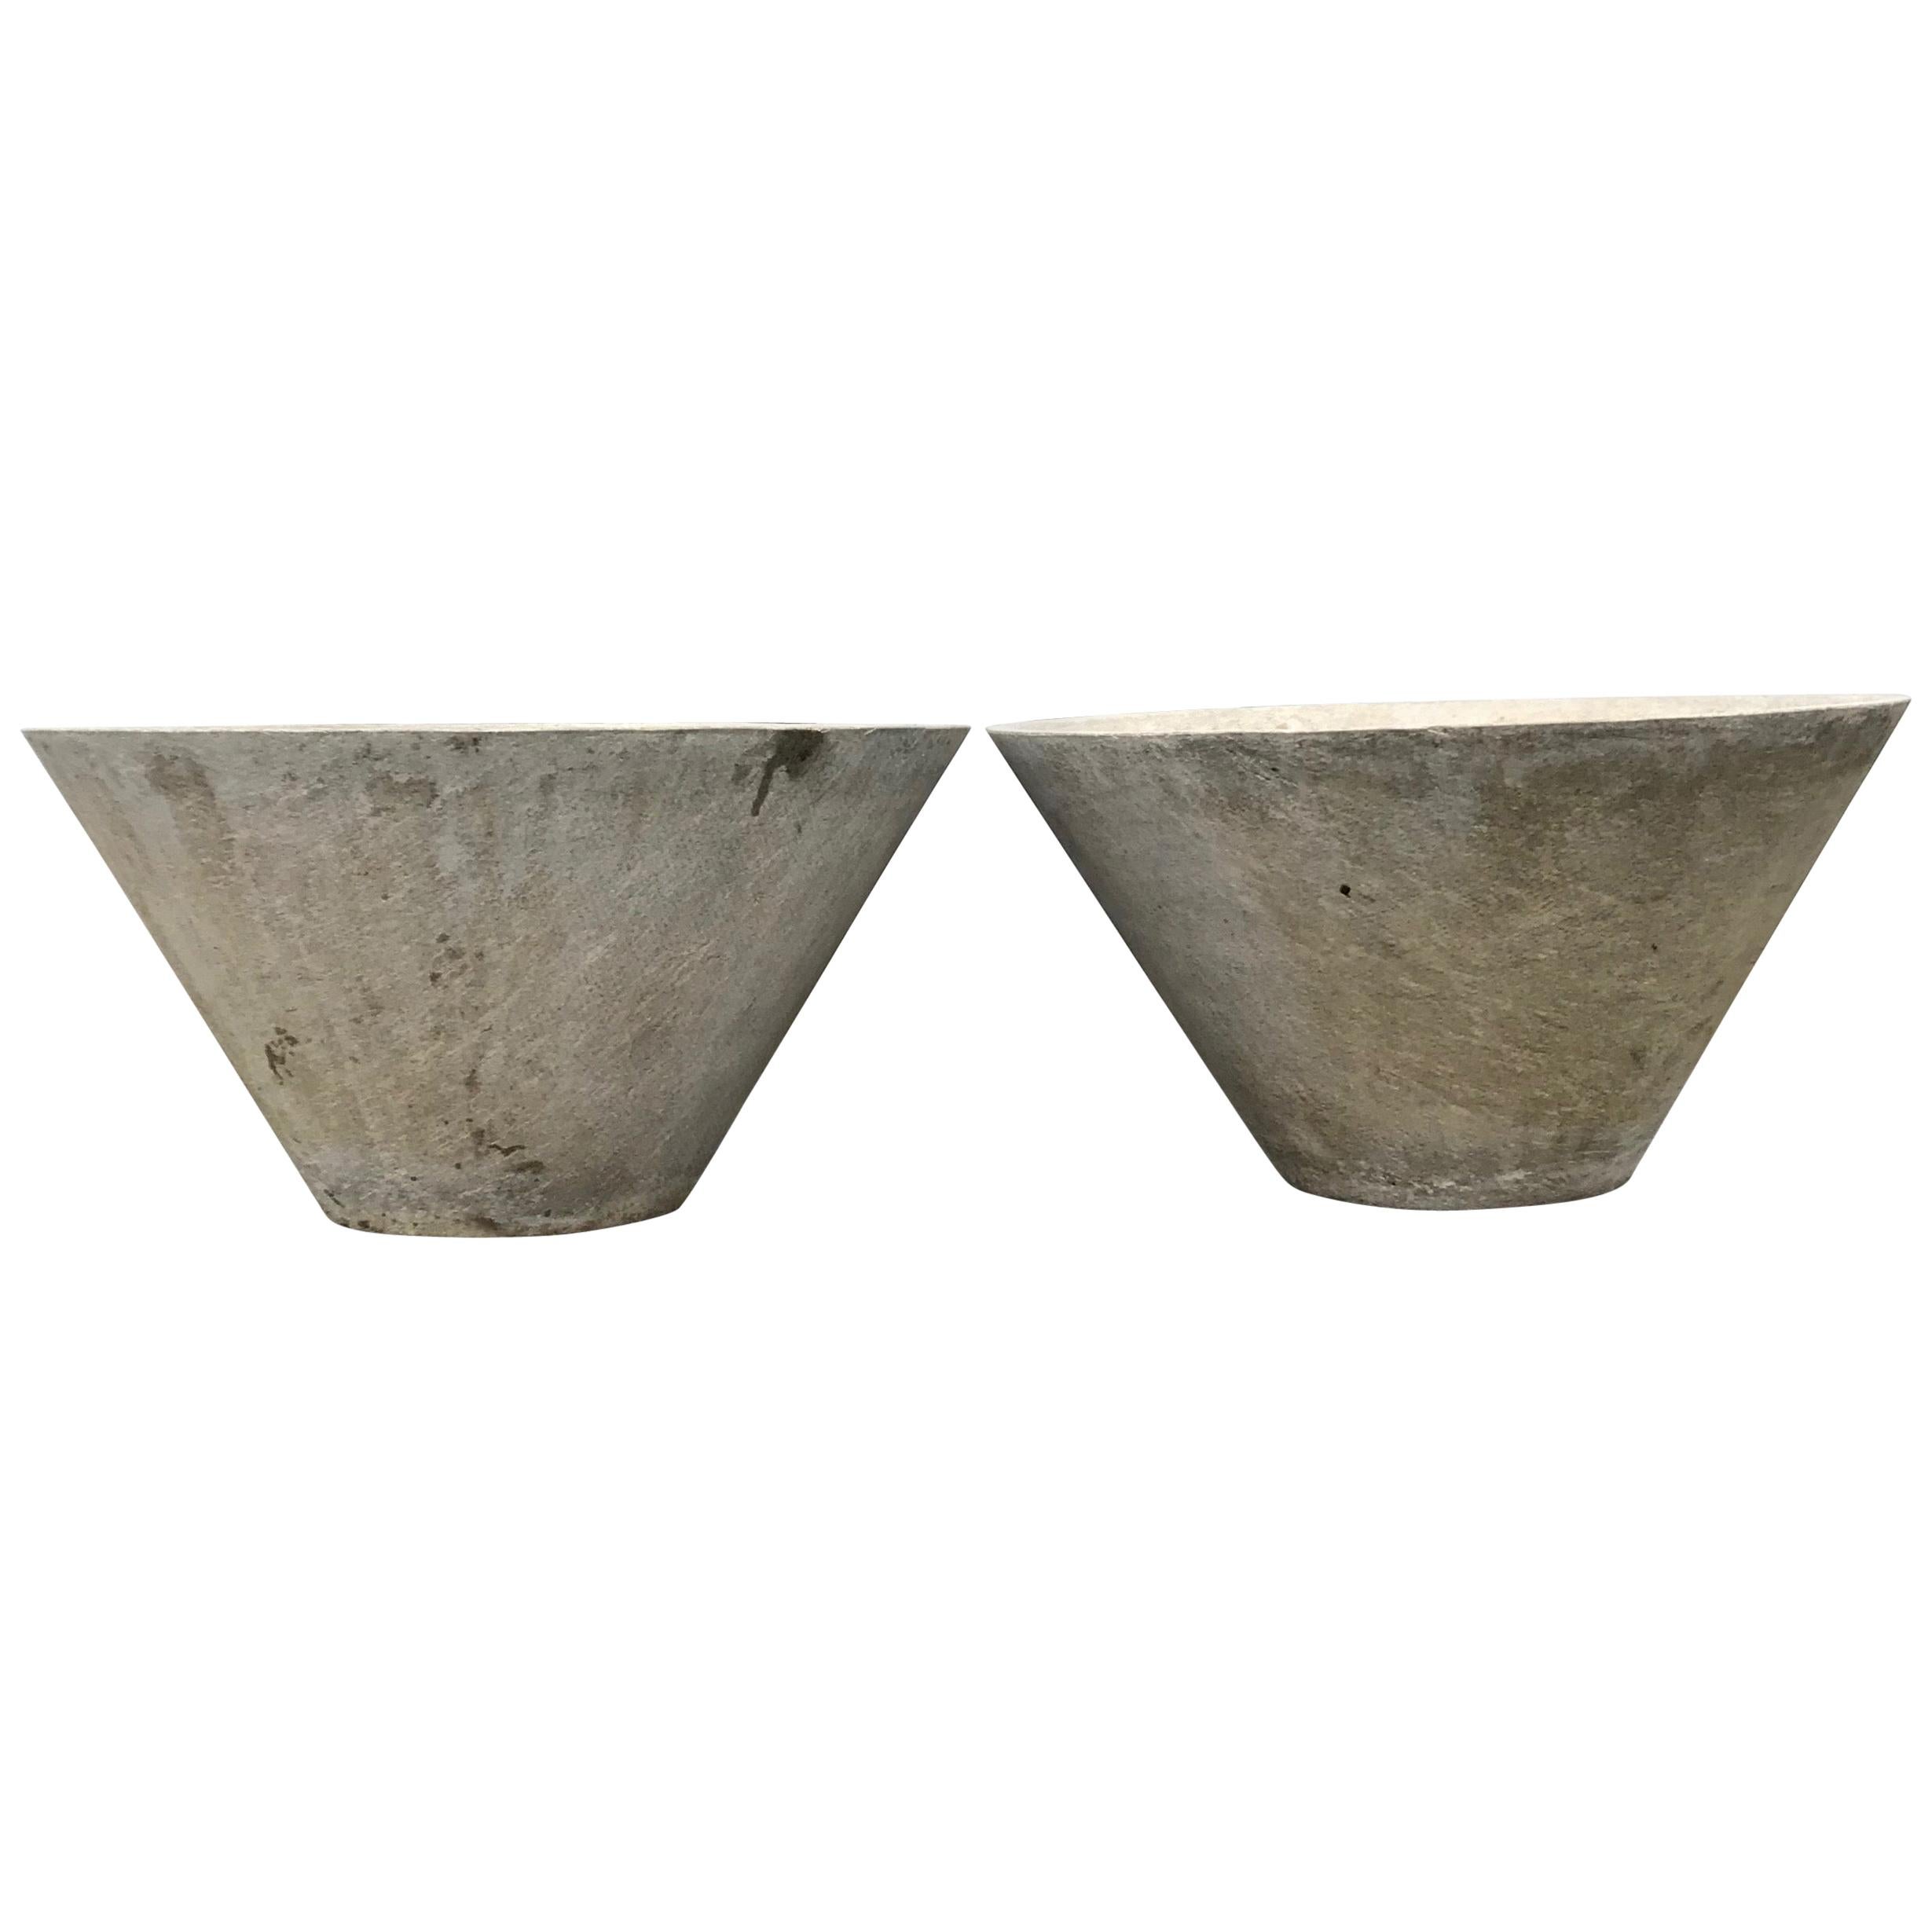 Pair of Large Canted Planters by Willy Guhl